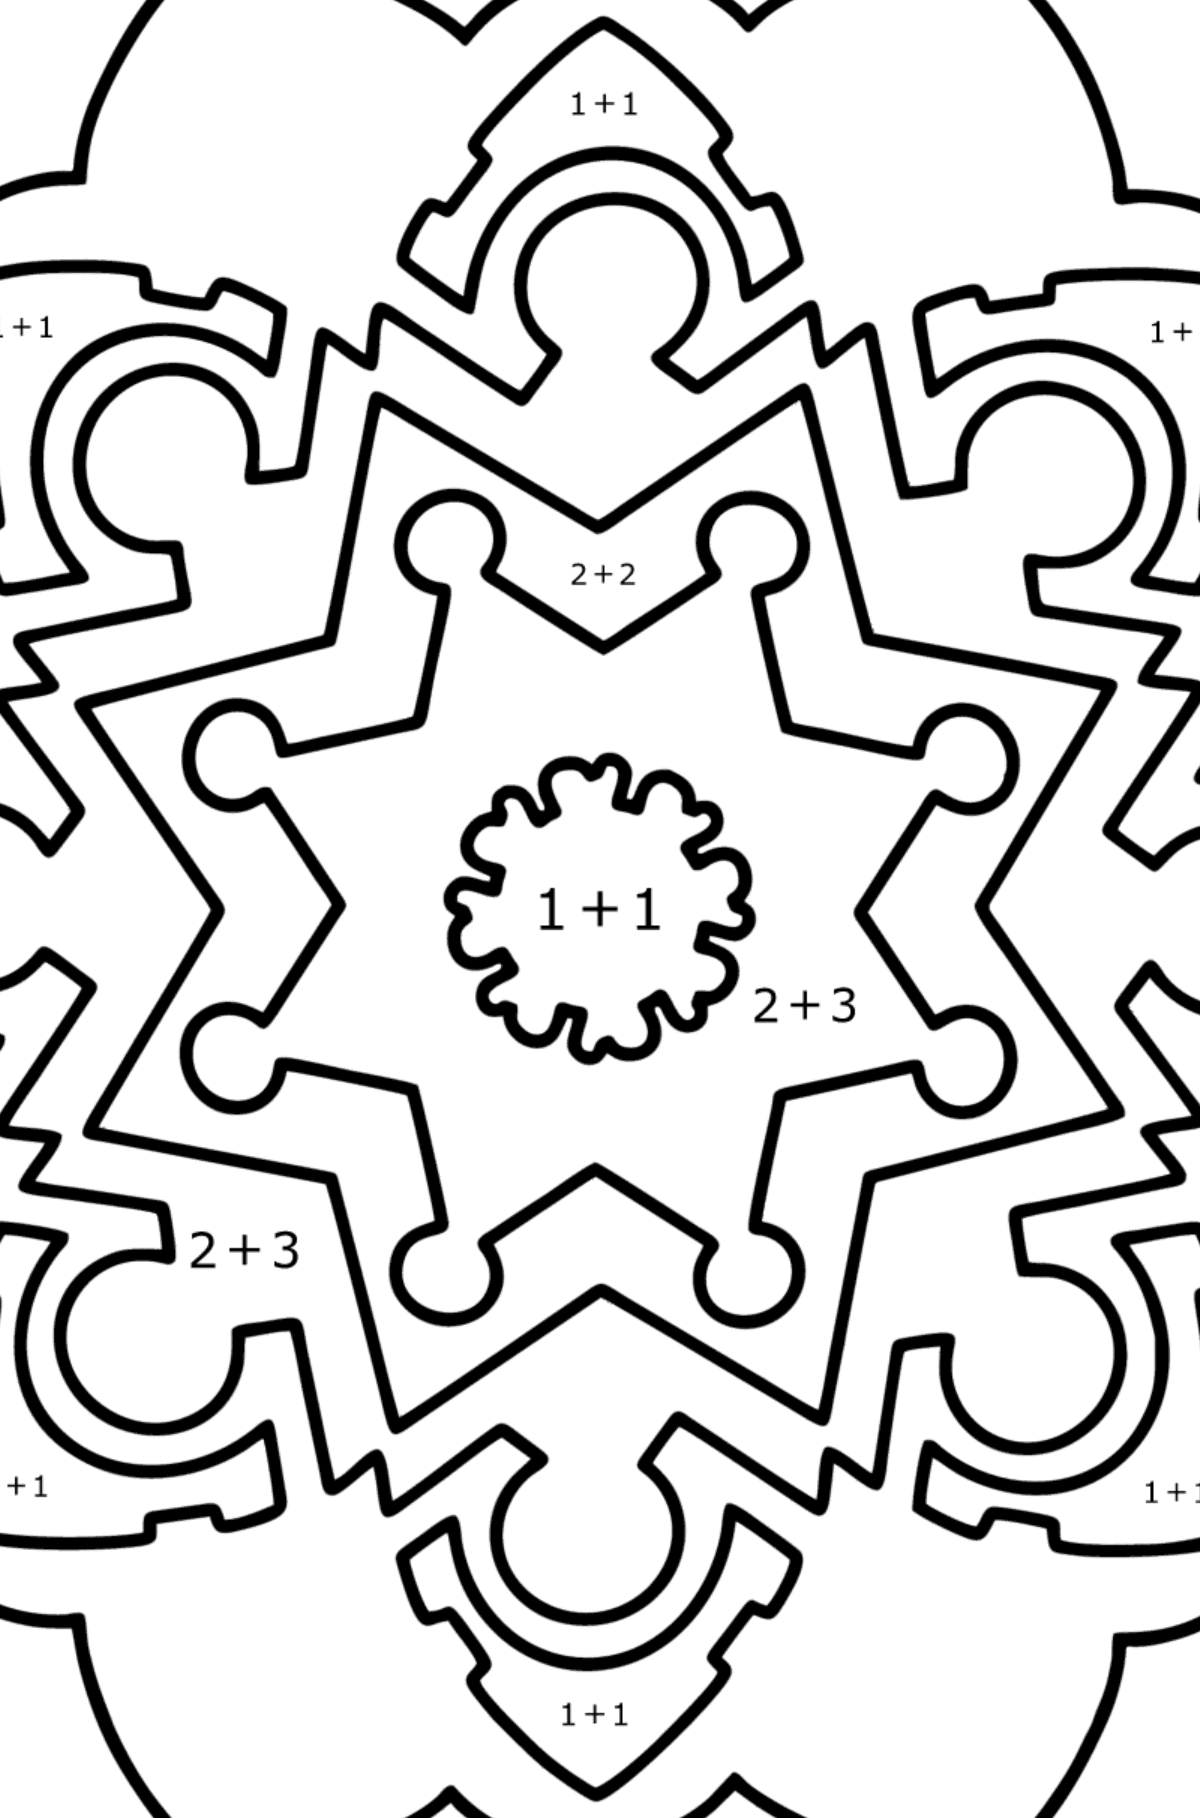 Mandala coloring page - 13 parts - Math Coloring - Addition for Kids